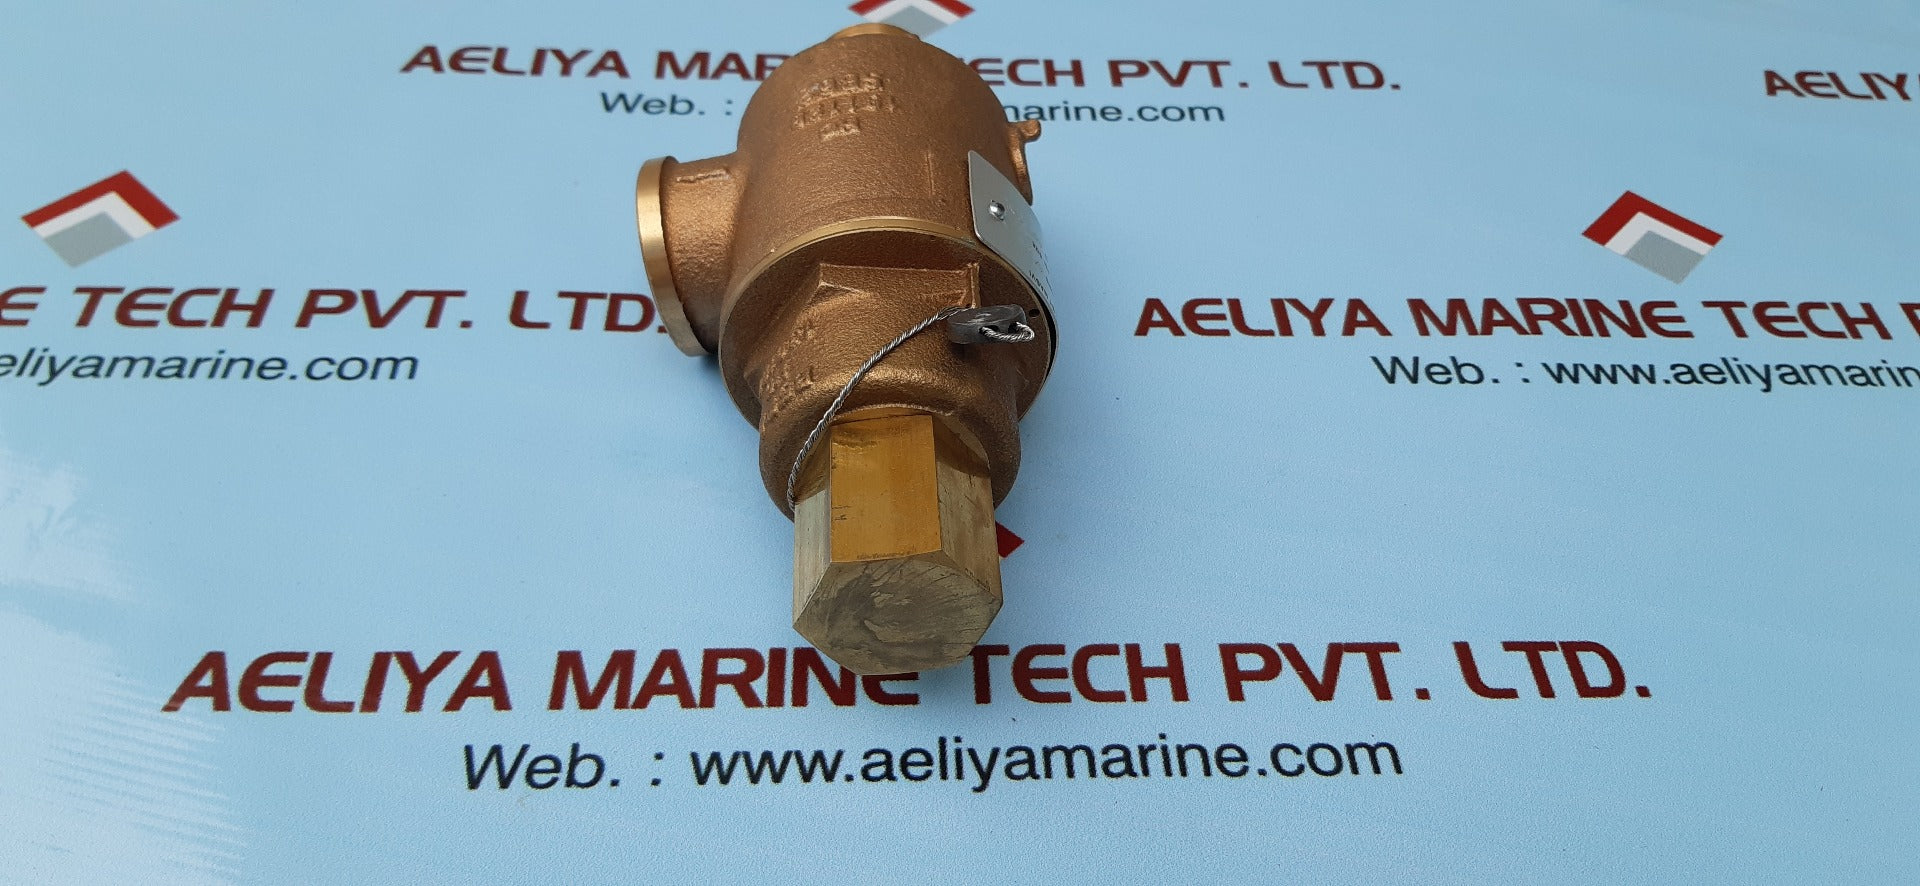 Kunkle 20-e01-mg safety relief valve